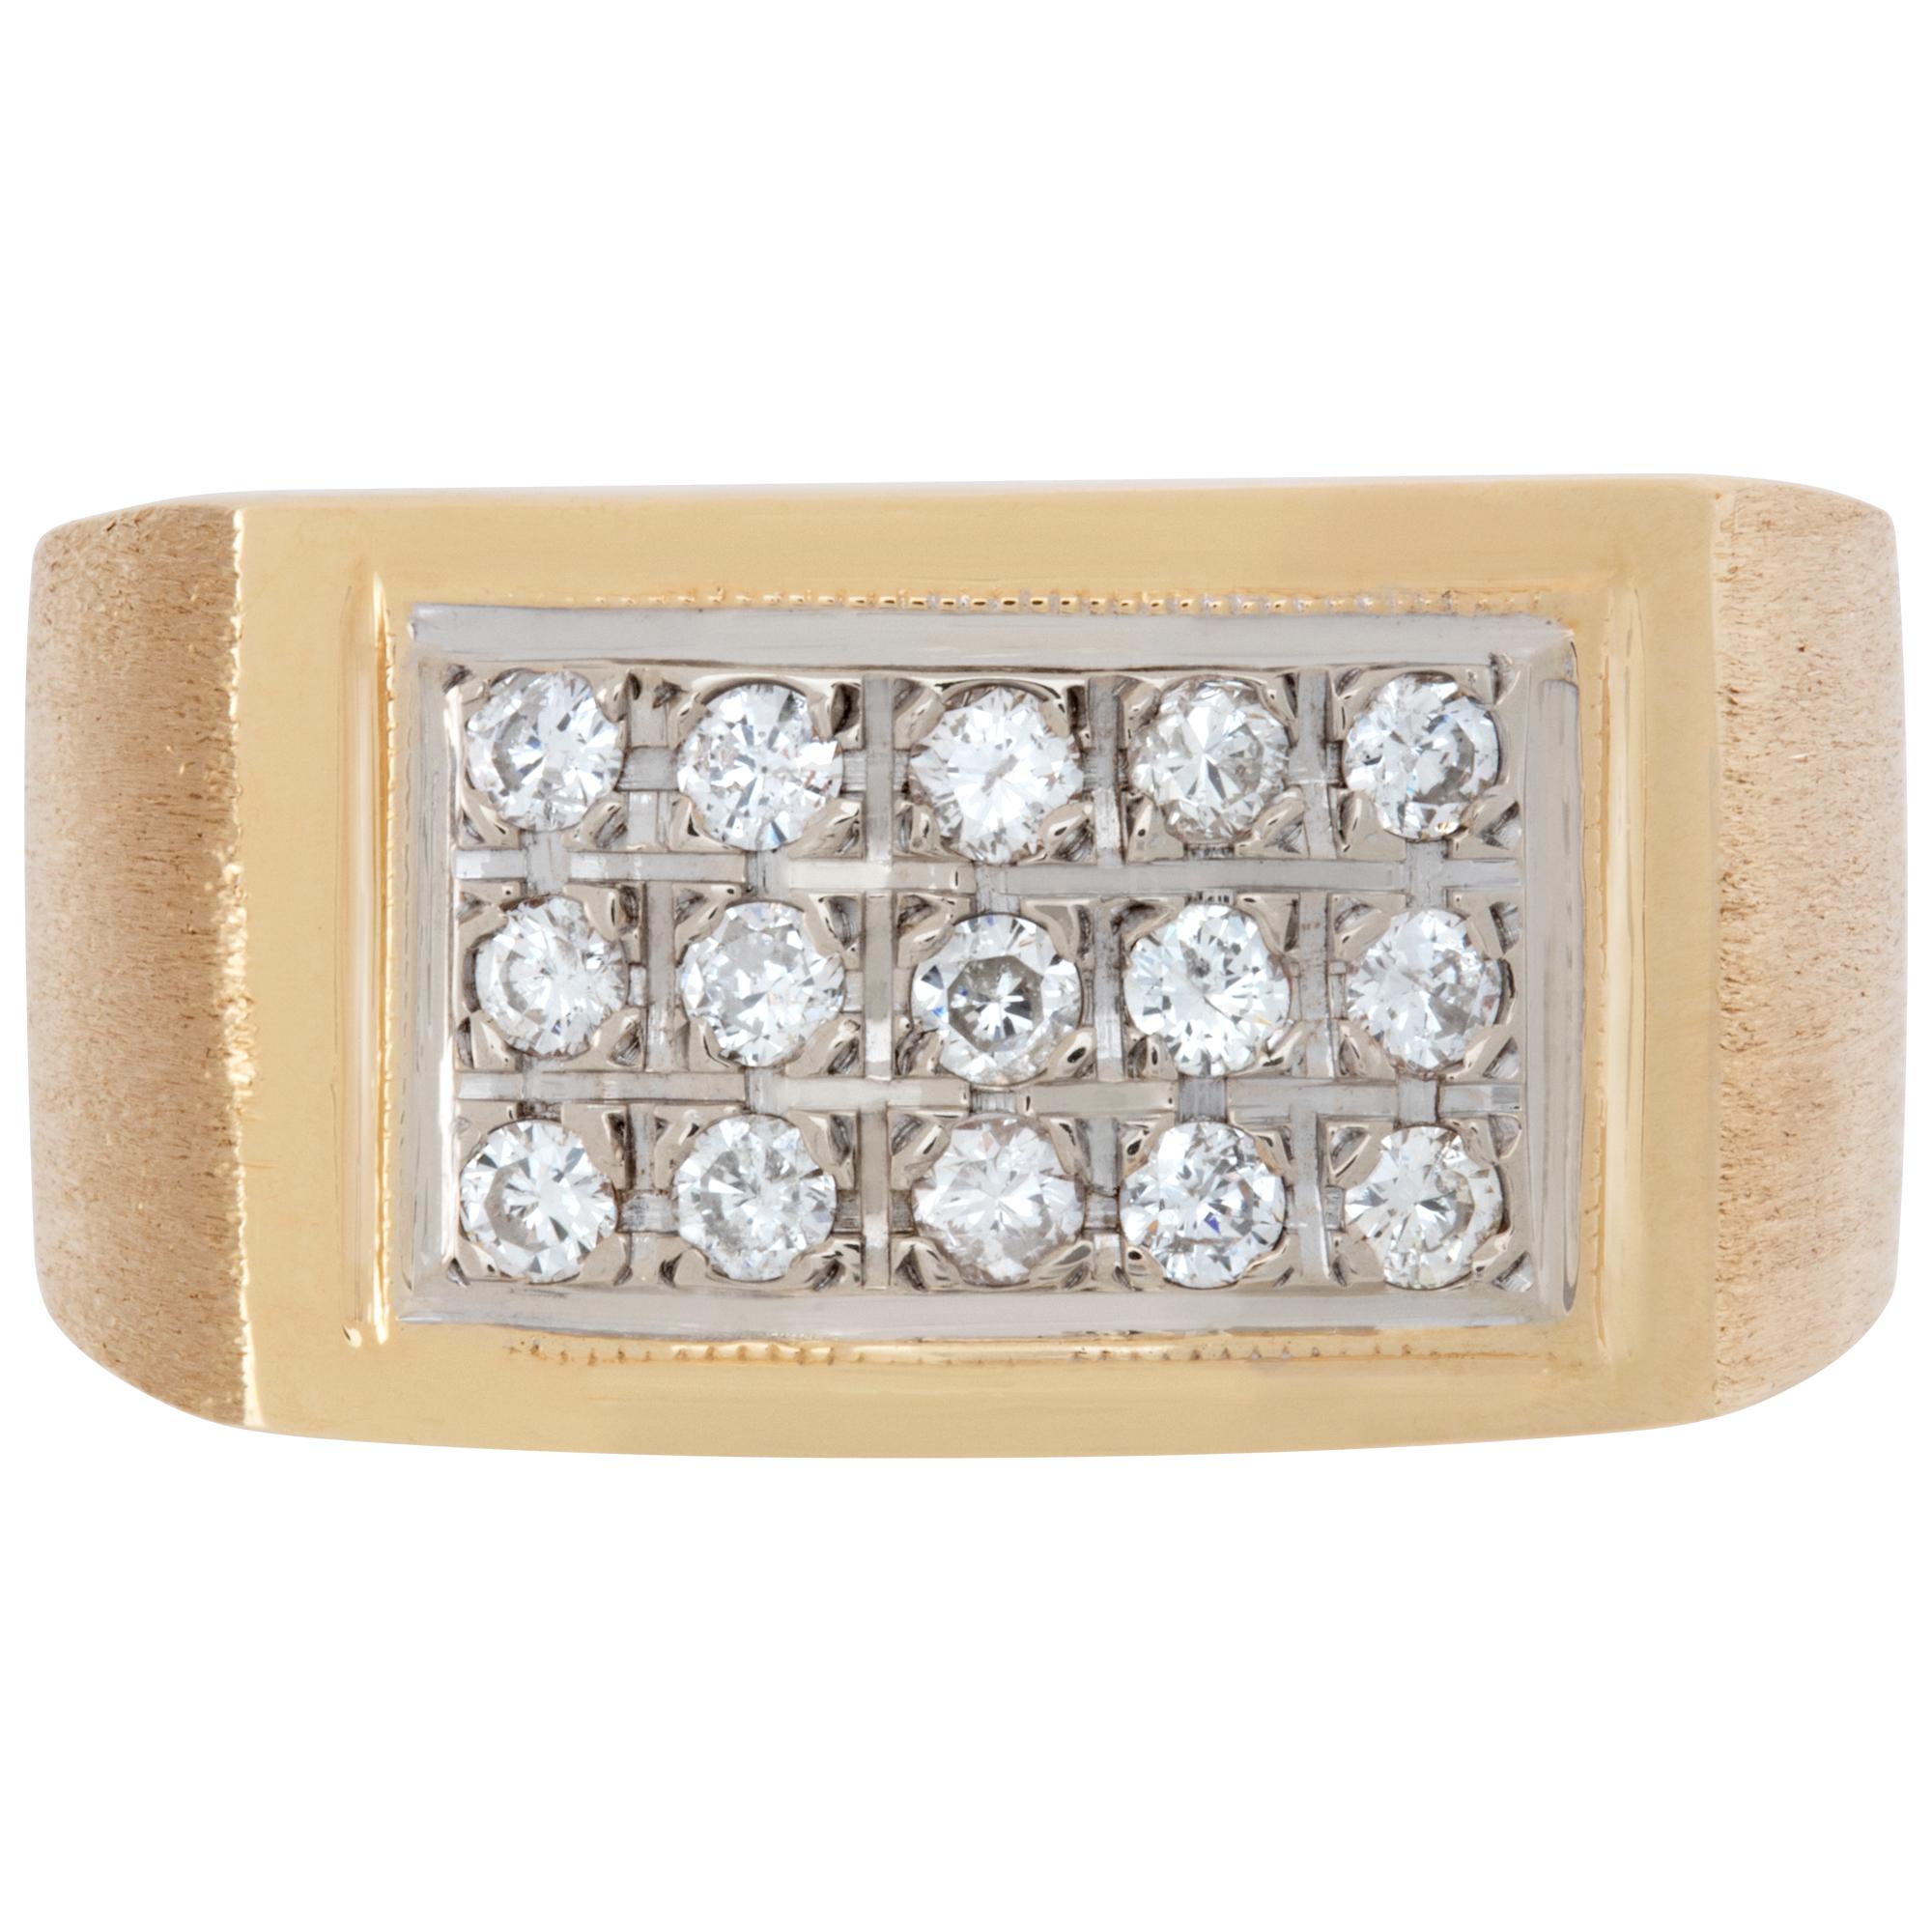 Gents solid diamond ring set in 14k yellow gold with 15 diamonds approximately 0.70 carat . Size 8. Width at head: 11.4mmx18.0mm, width at shank: 6.0mm.This Diamond ring is currently size 8 and some items can be sized up or down, please ask! It